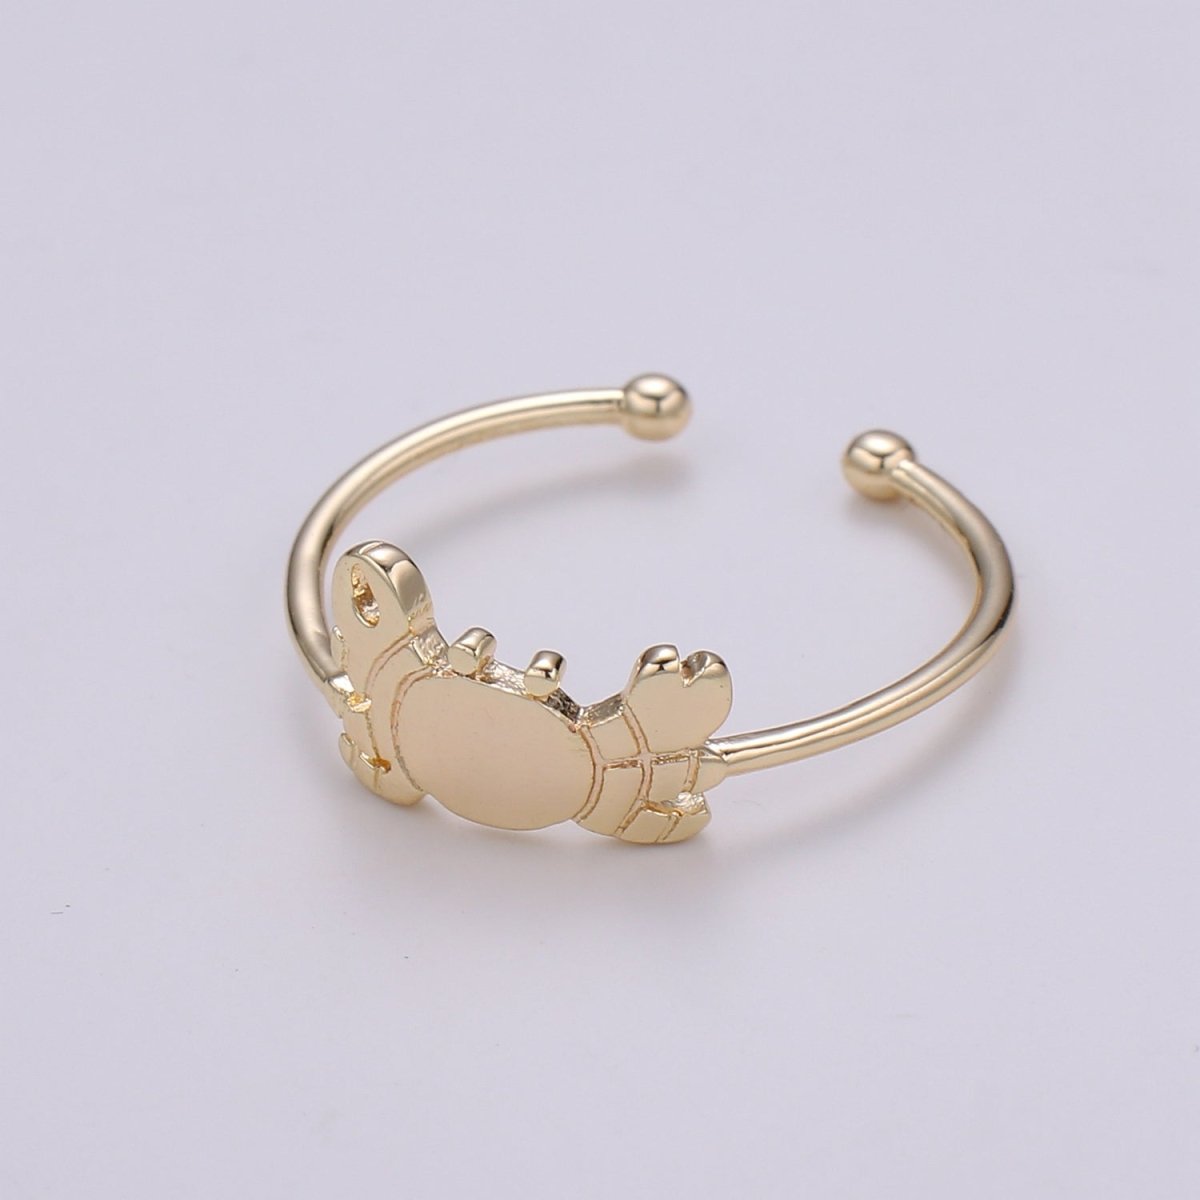 King Crab 18k Gold Ring, Adjustable Gold Curb Ring, Simple Ocean Life Ring, The Animal Ring- R-261 - DLUXCA